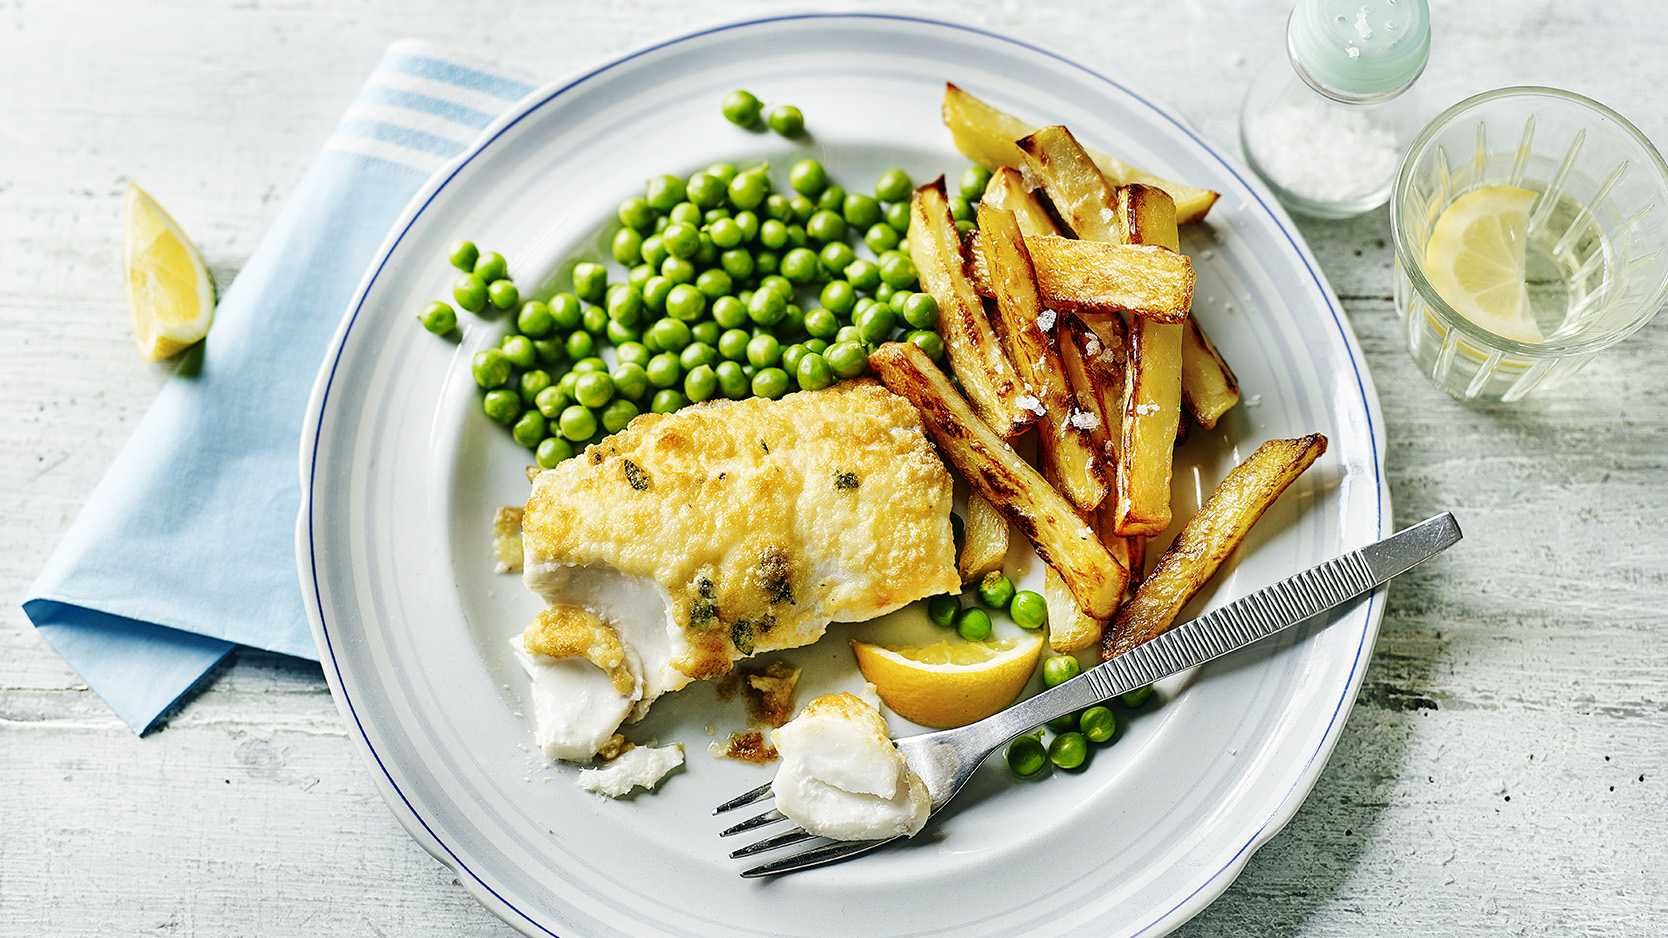 Fish and chips recipe - BBC Food